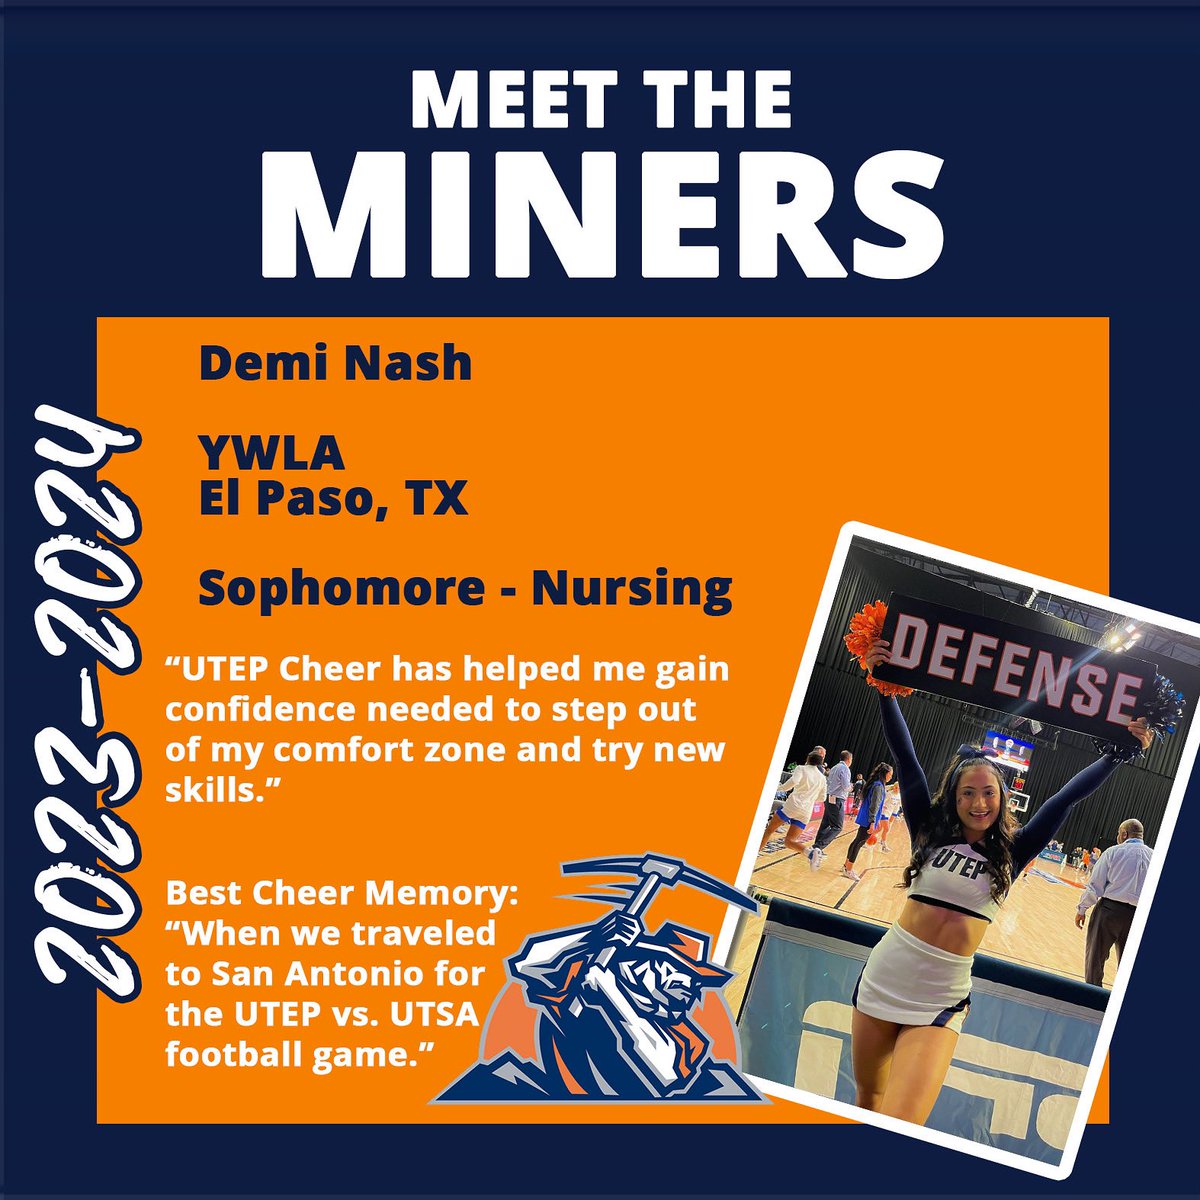 Welcome back to our 2nd year Demi, we are looking forward to another amazing year! 🧡
#picksup #gominers